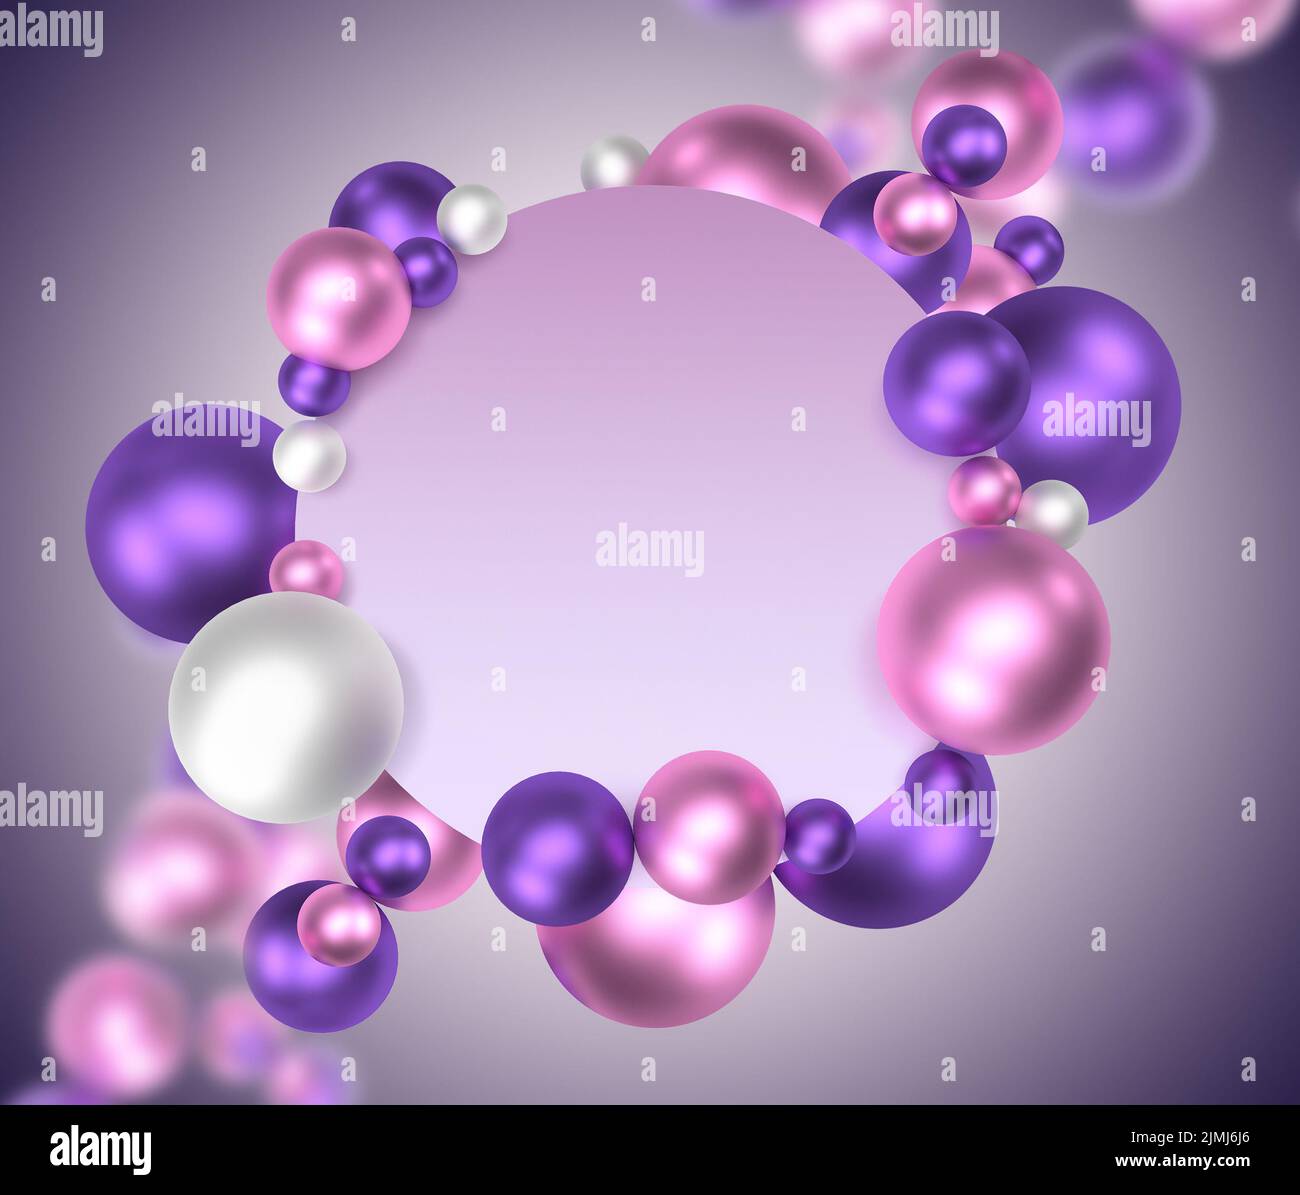 Abstract Bright Background with Pearlescent Balls Stock Photo